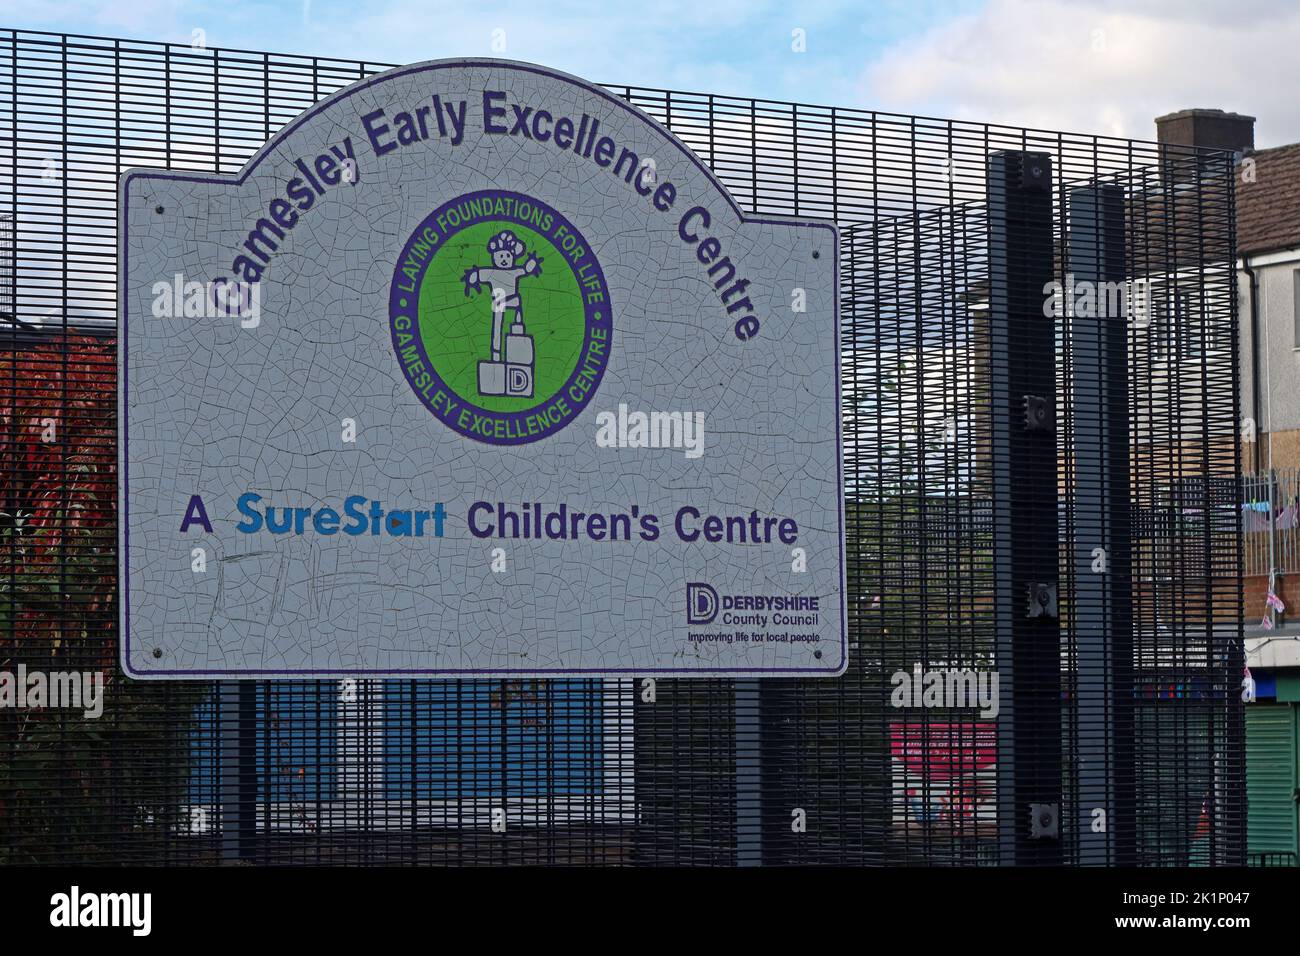 SureStart Childrens Centre, Gamesley Early Excellence Centre, Derbyshire County Council - Winster Mews, Gamesley, Glossop, Derbyshire, SK13 0LU Stockfoto